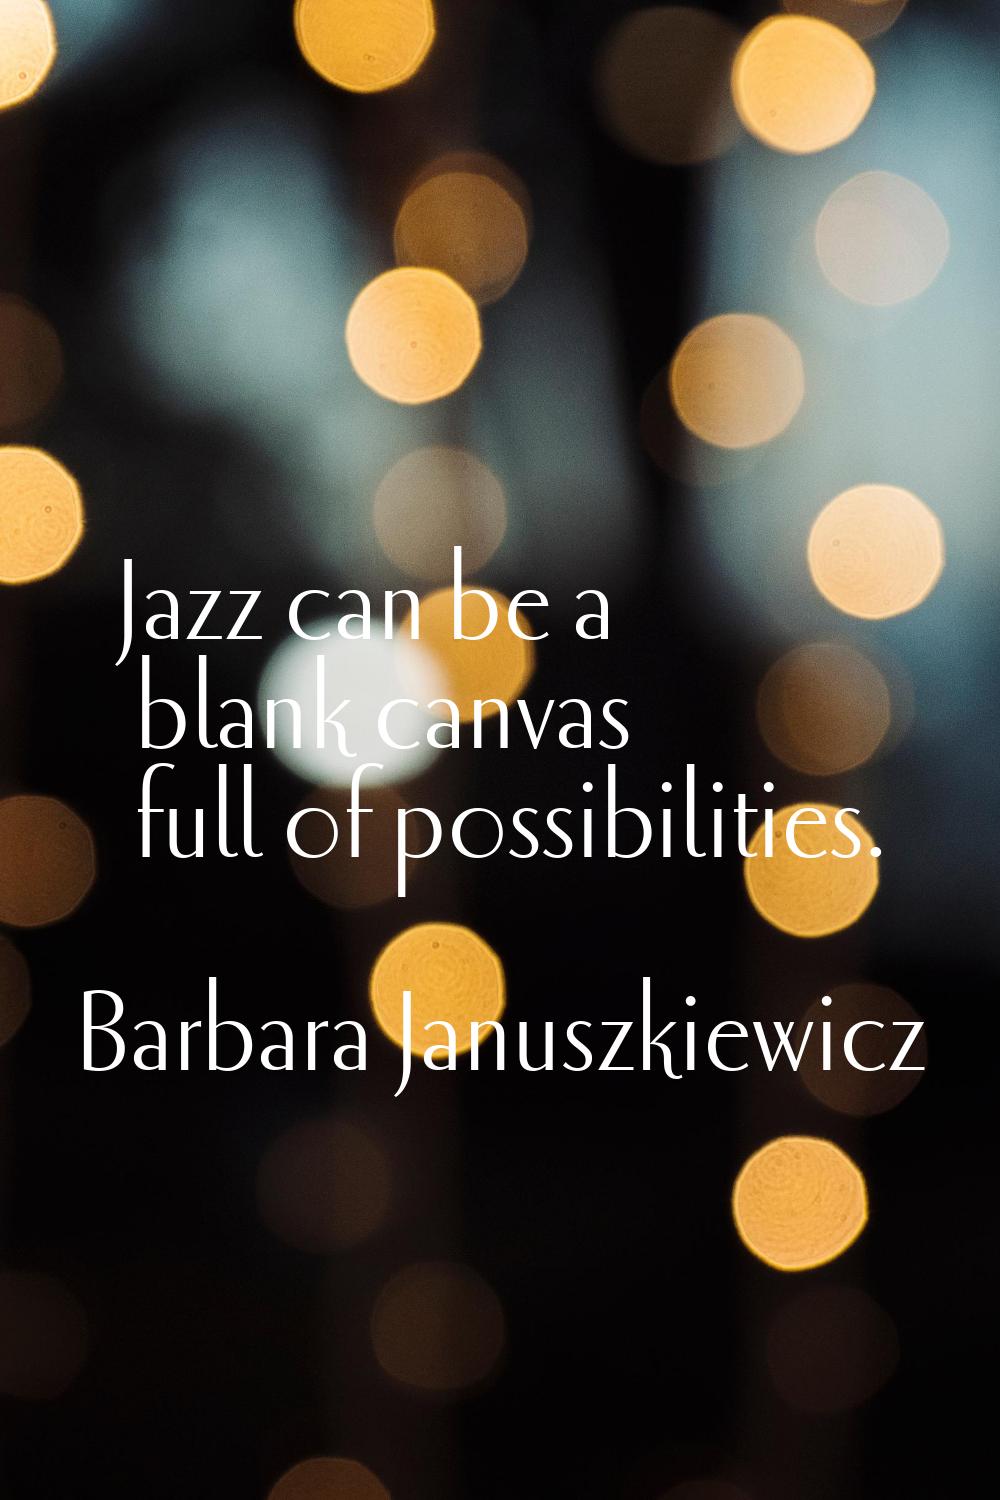 Jazz can be a blank canvas full of possibilities.